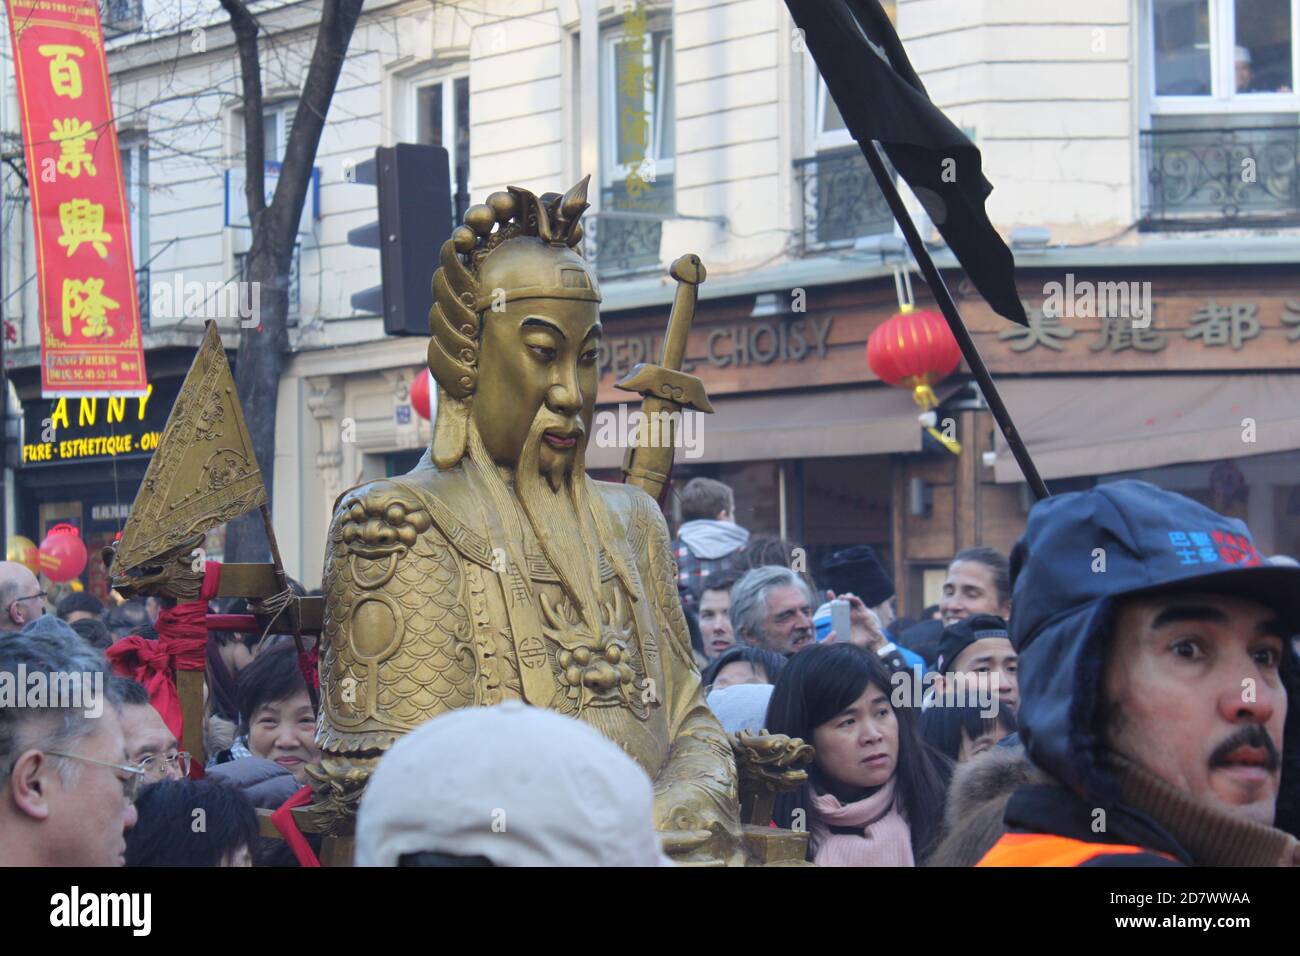 Chinese new year february 2014 in Paris 13th district Stock Photo